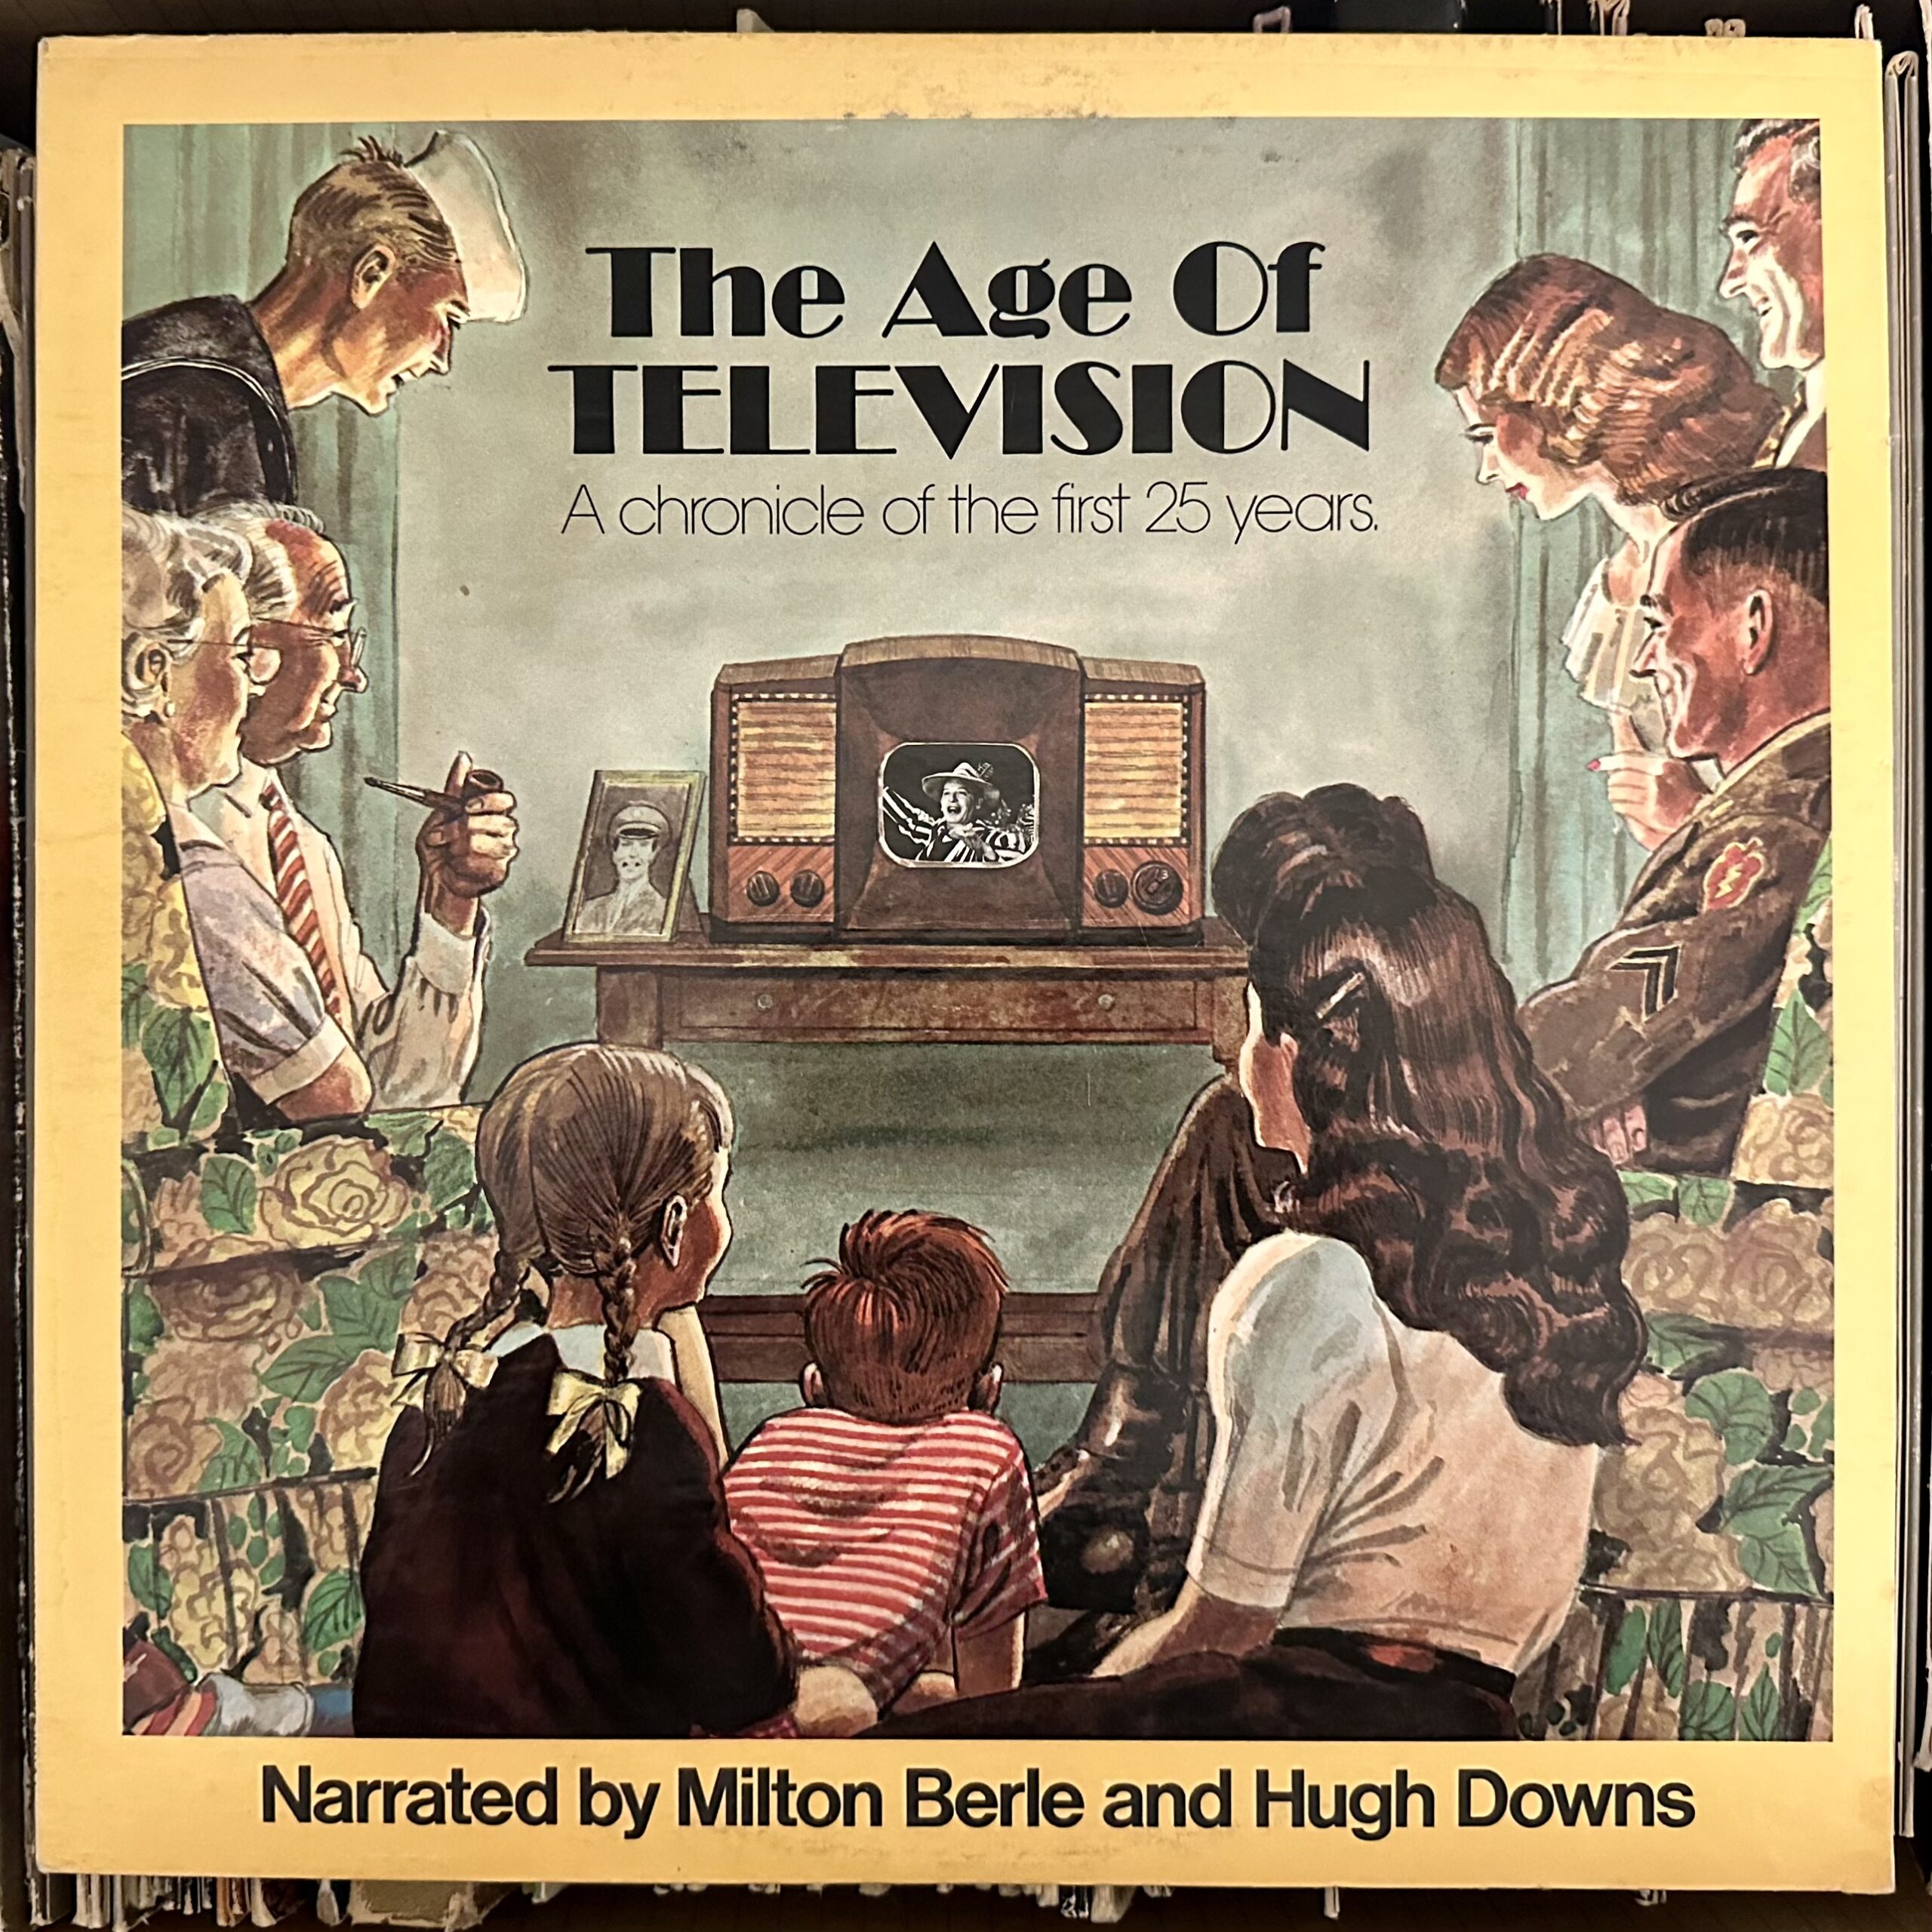 The Age of TELEVISION: A chronicle of the first 25 years